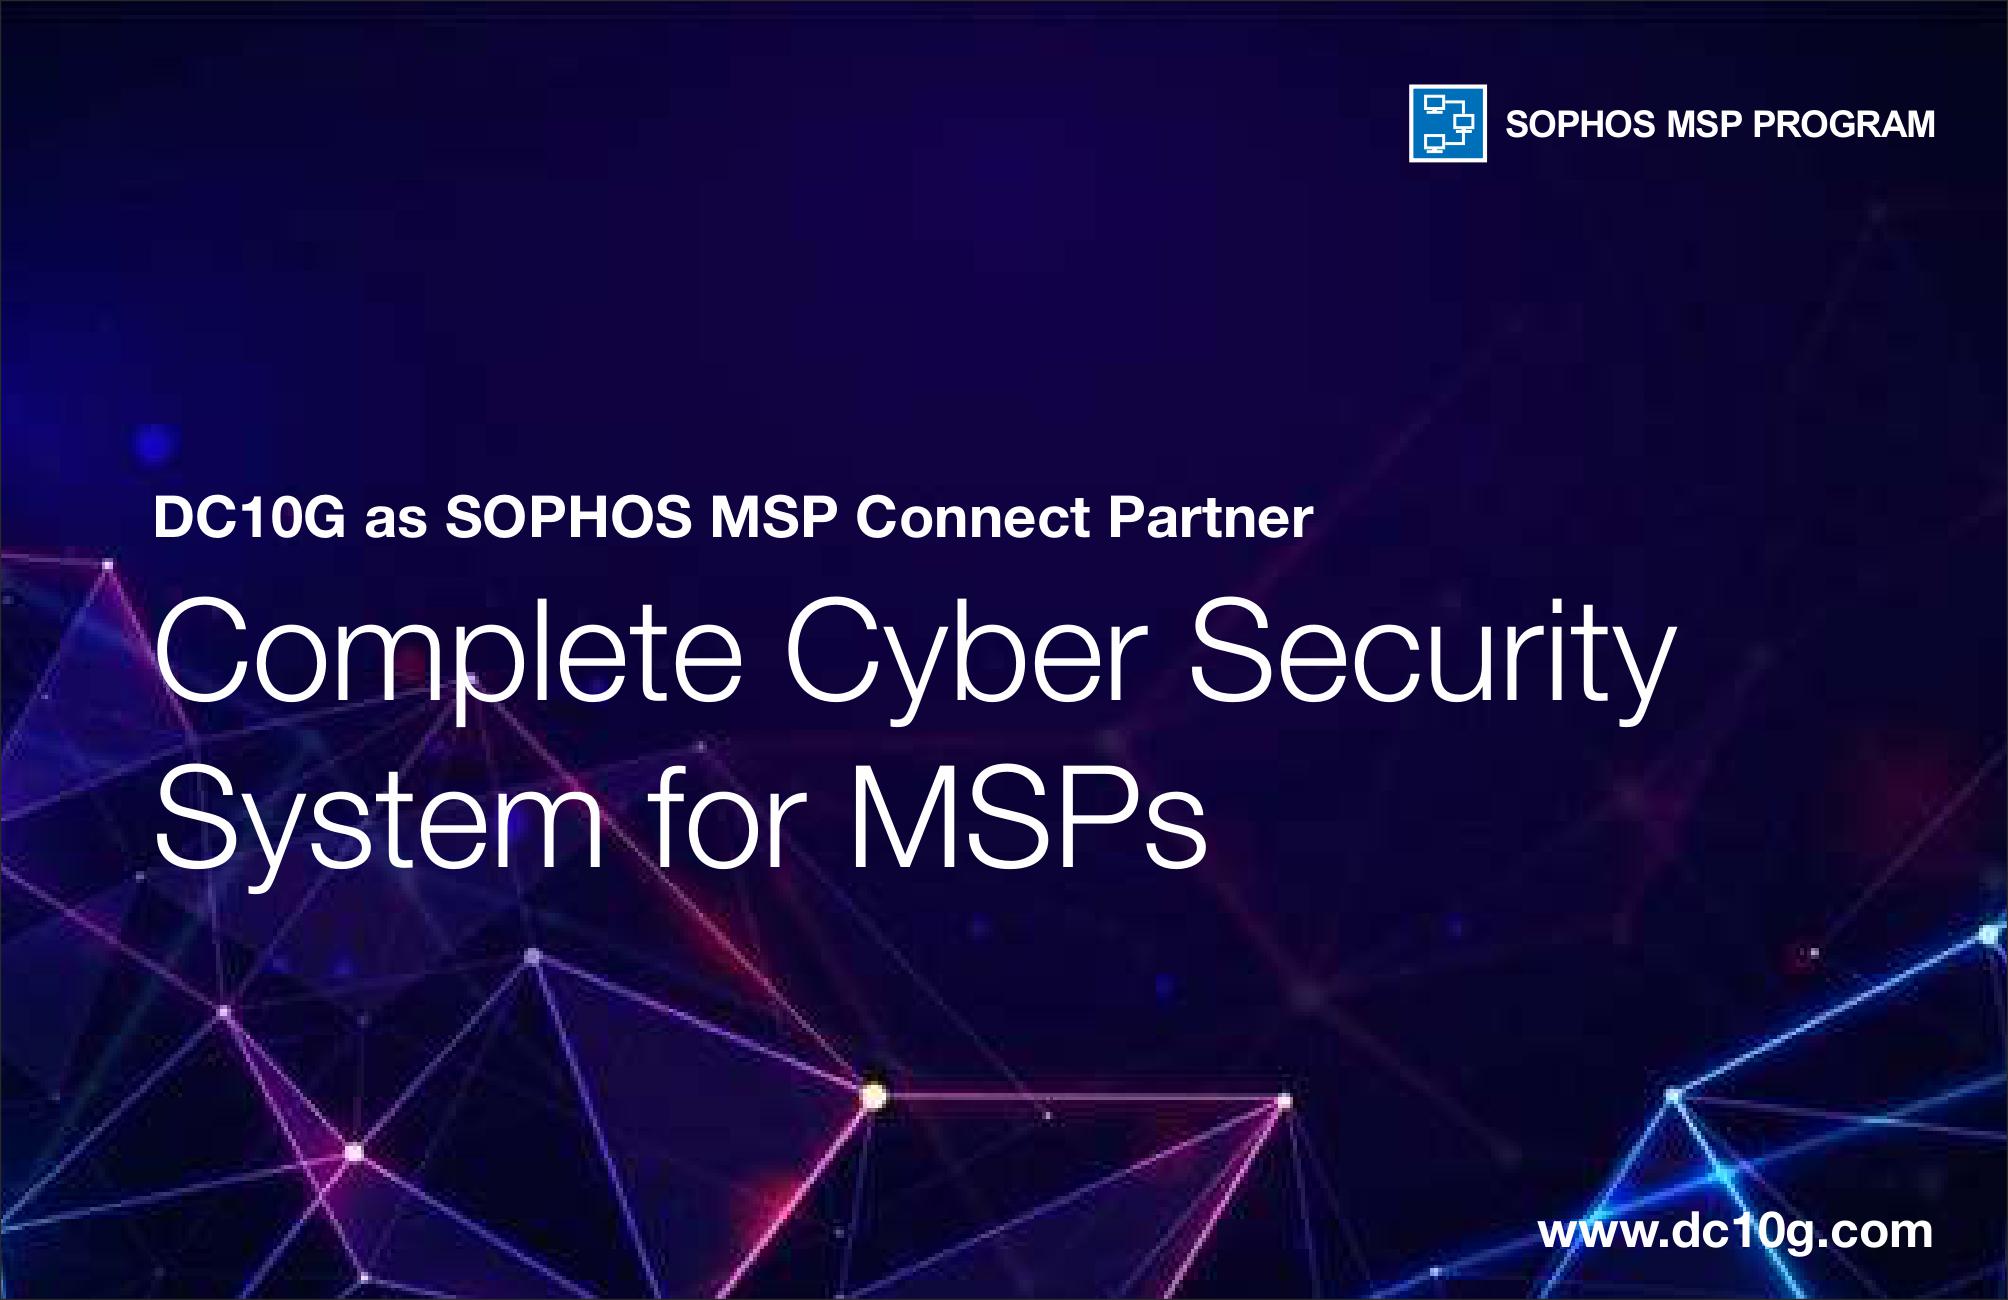 complete cyber security for MSPs of D10g